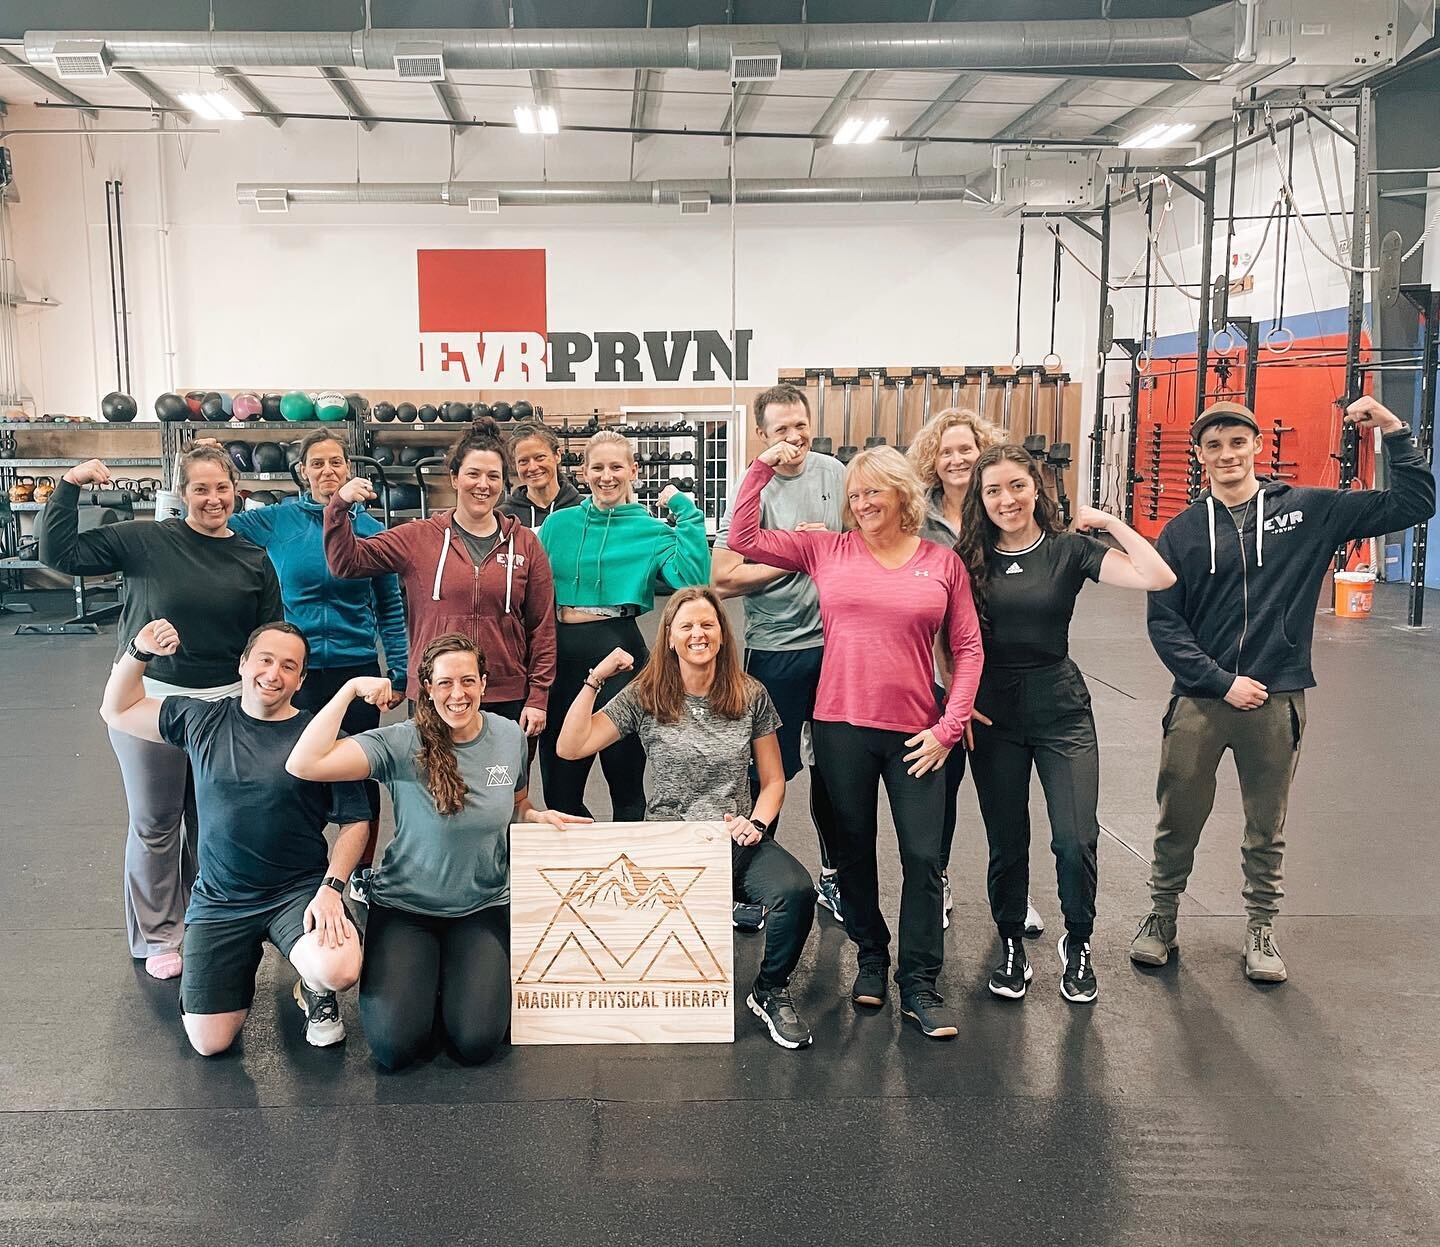 Mobility 101 workshop this past weekend was an awesome hour! Thanks @everproven for hosting Magnify PT, and thanks to everyone who participated!

We will be having an additional mobility workshop in the future - because there&rsquo;s always something